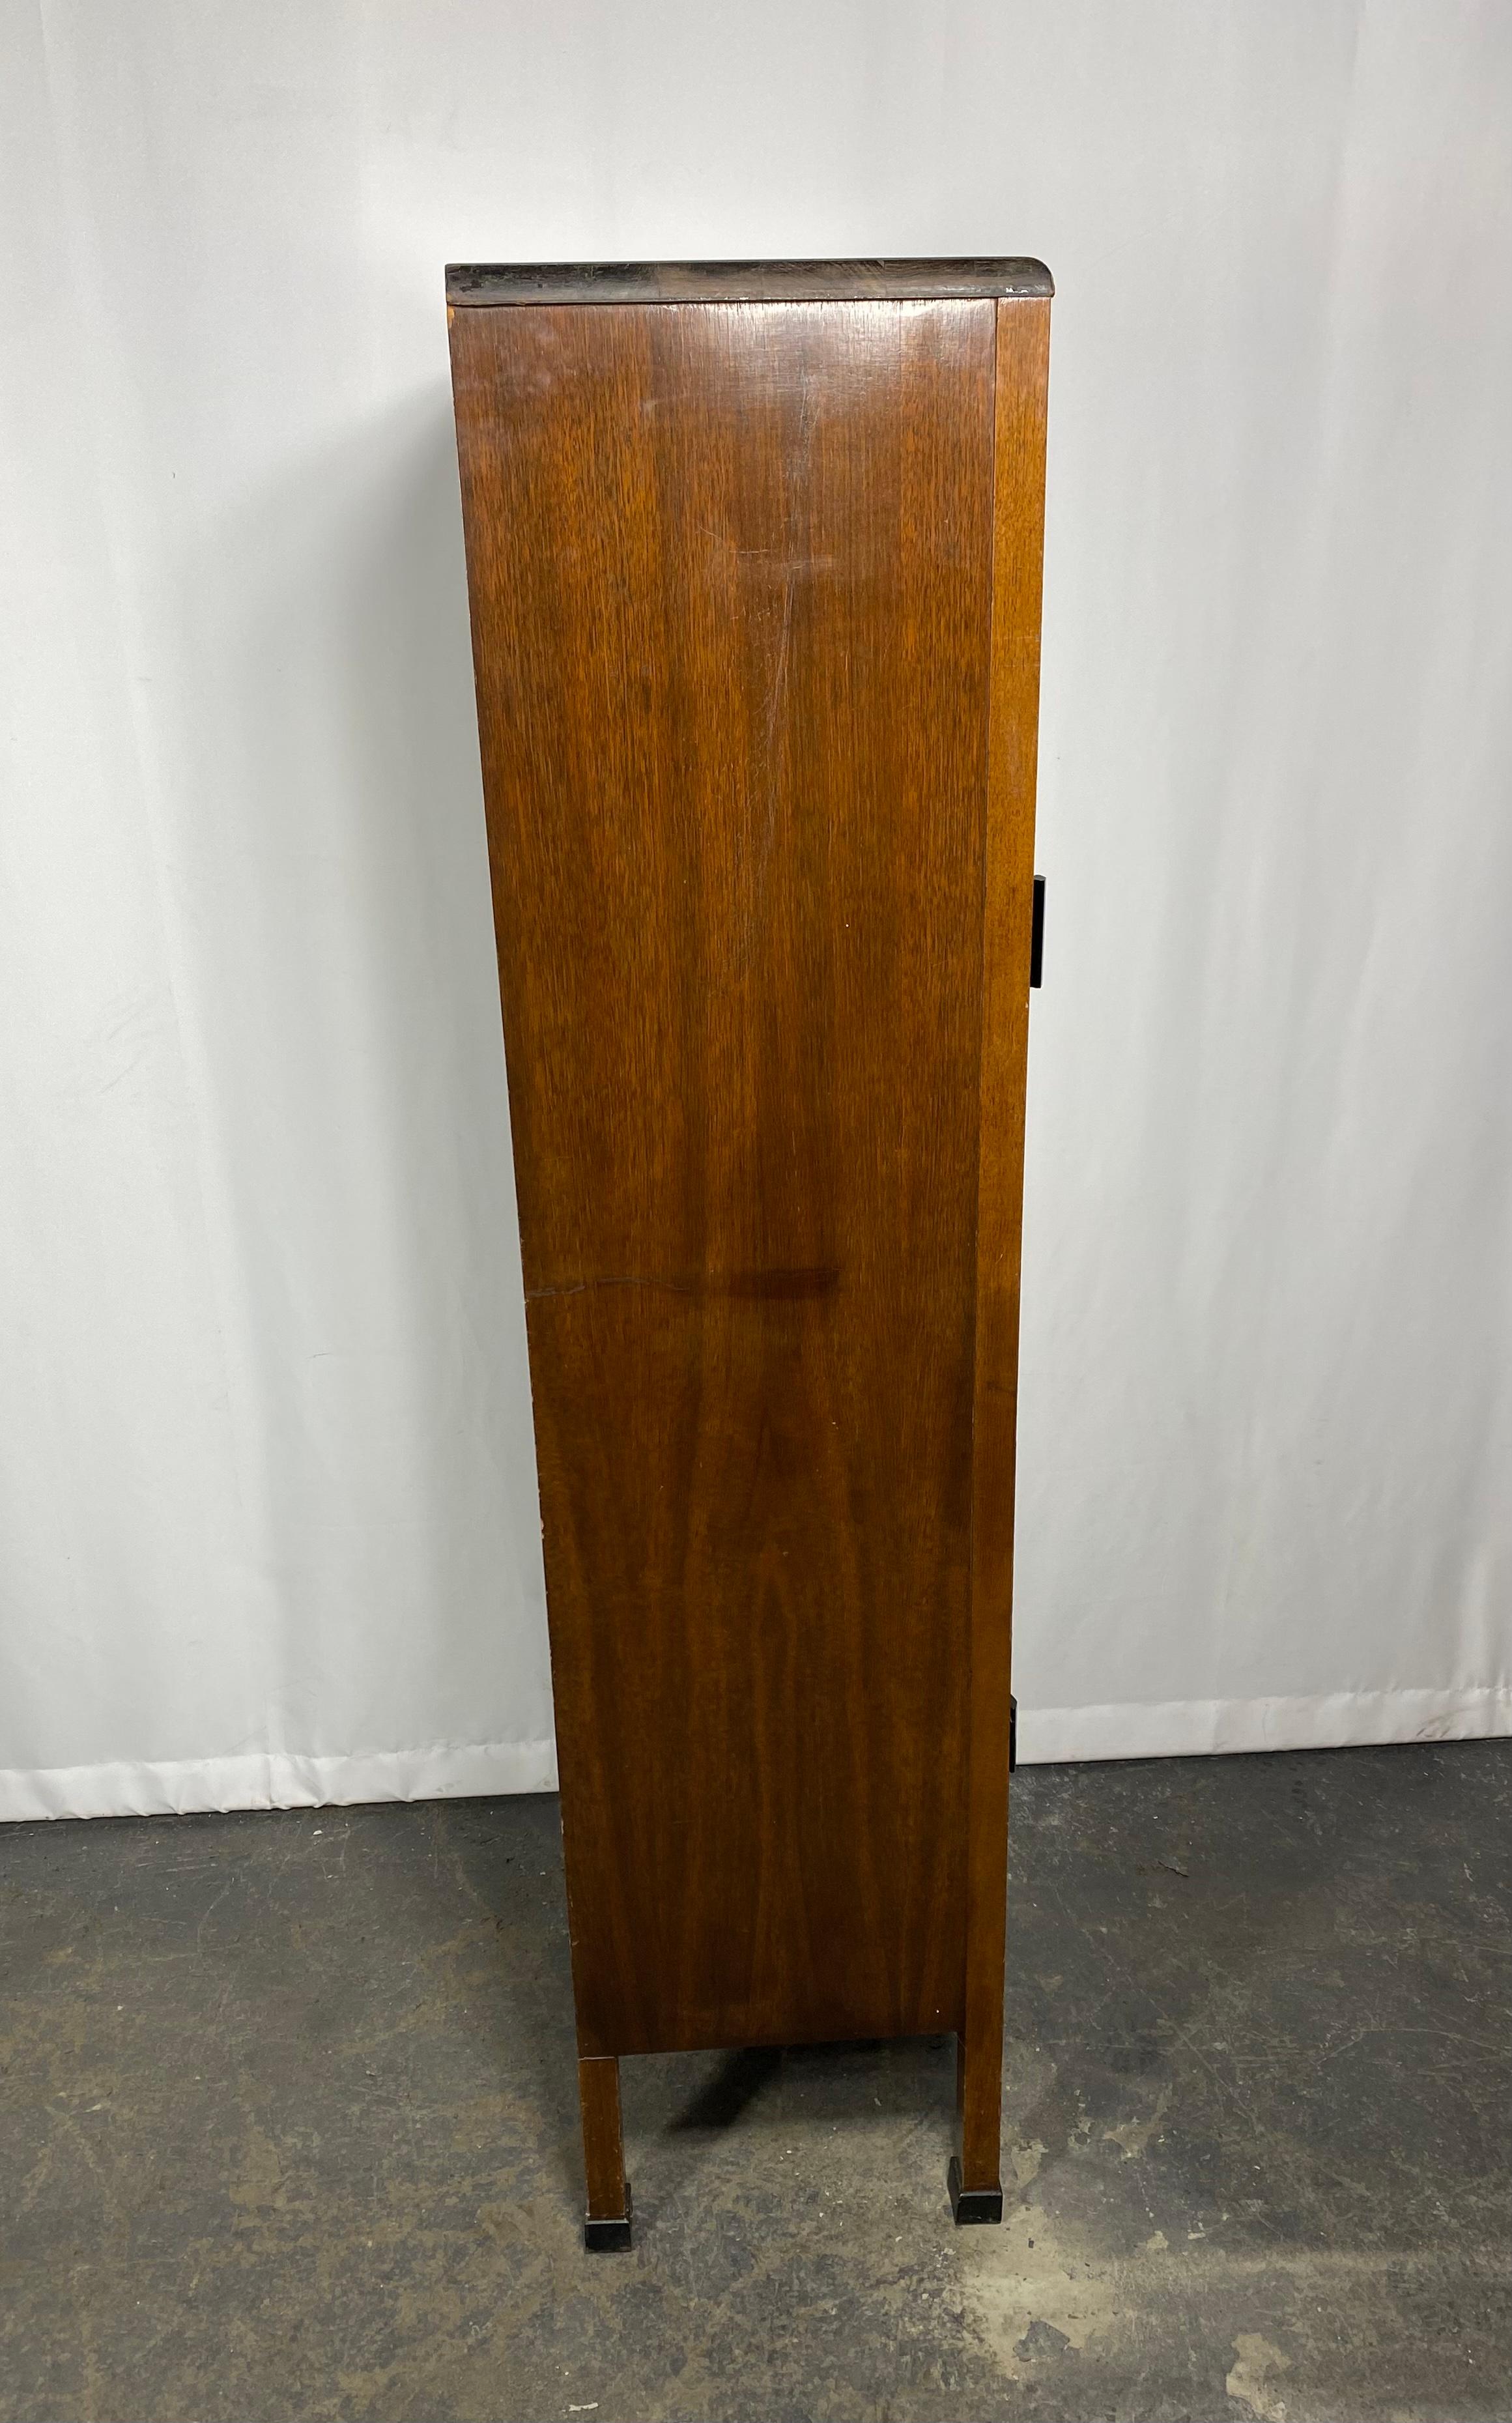 Glass Elegant Art Deco Dental cabinet, walnut and glass, manufactured by ENOCHS For Sale